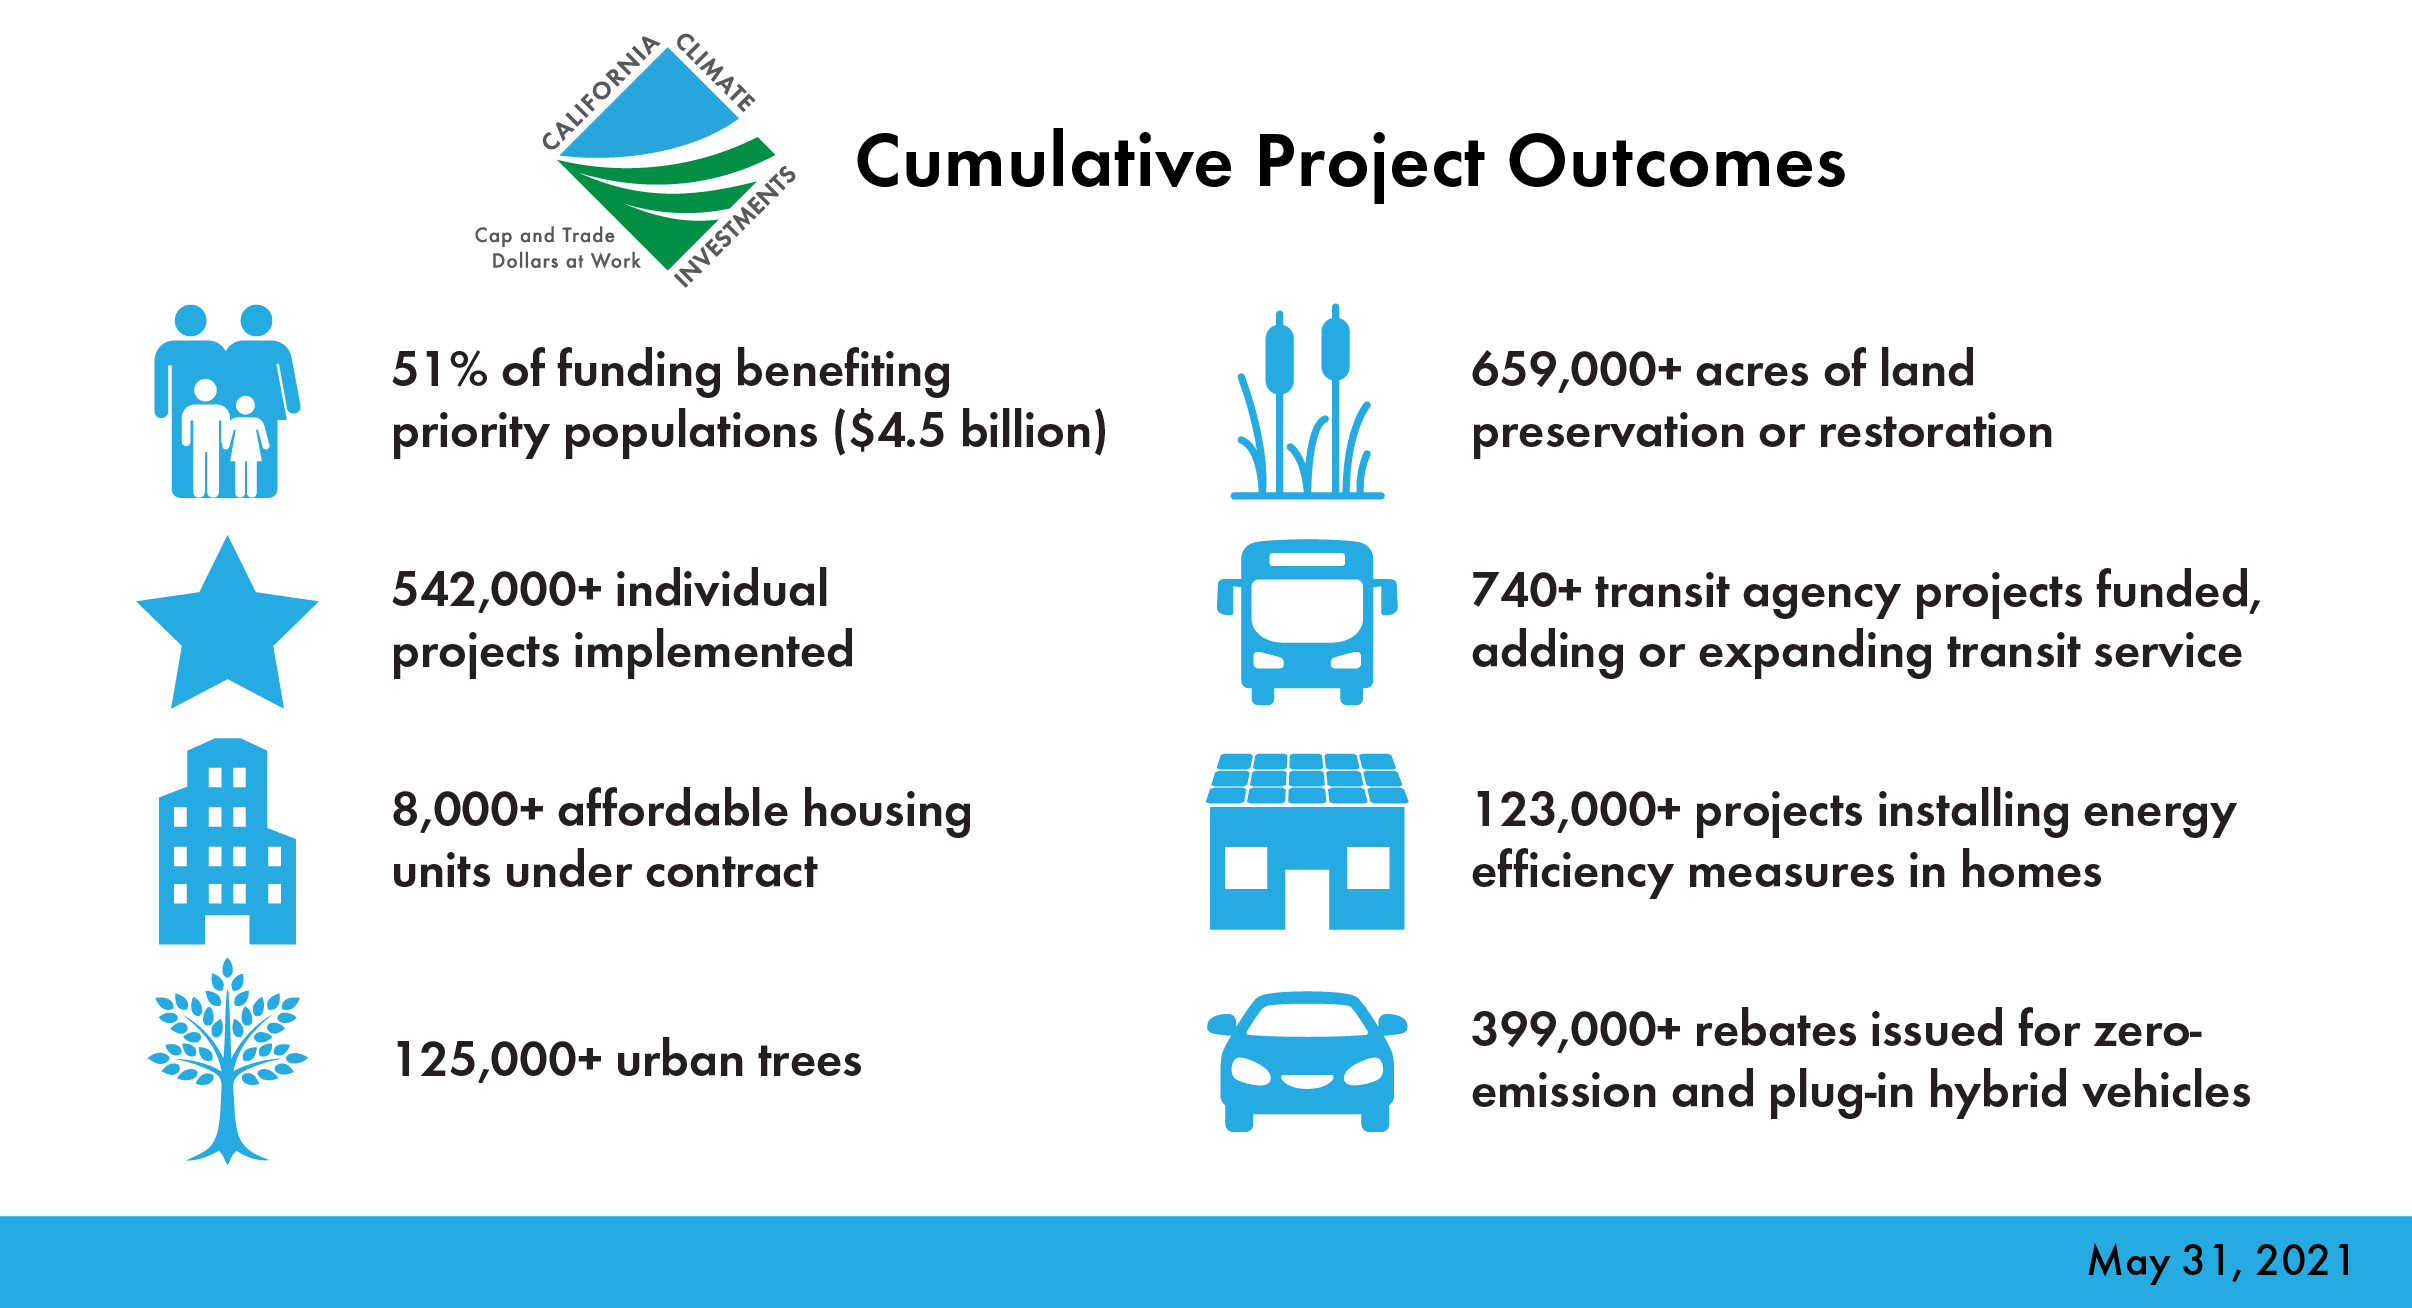 CCI logo Cumulative Project Outcomes 51% of funding benefiting priority populations ($4.5 billion) 542,000+ individual projects implemented  8,000+ affordable housingunits under contract  125,000+ urban trees 659,000+ acres of land preservation or restoration 740+ transit agency projects funded,adding or expanding transit service 123,000+ projects installing energy efficiency measures in homes  399,000+ rebates issued for zero-emission and plug-in hybrid vehicles